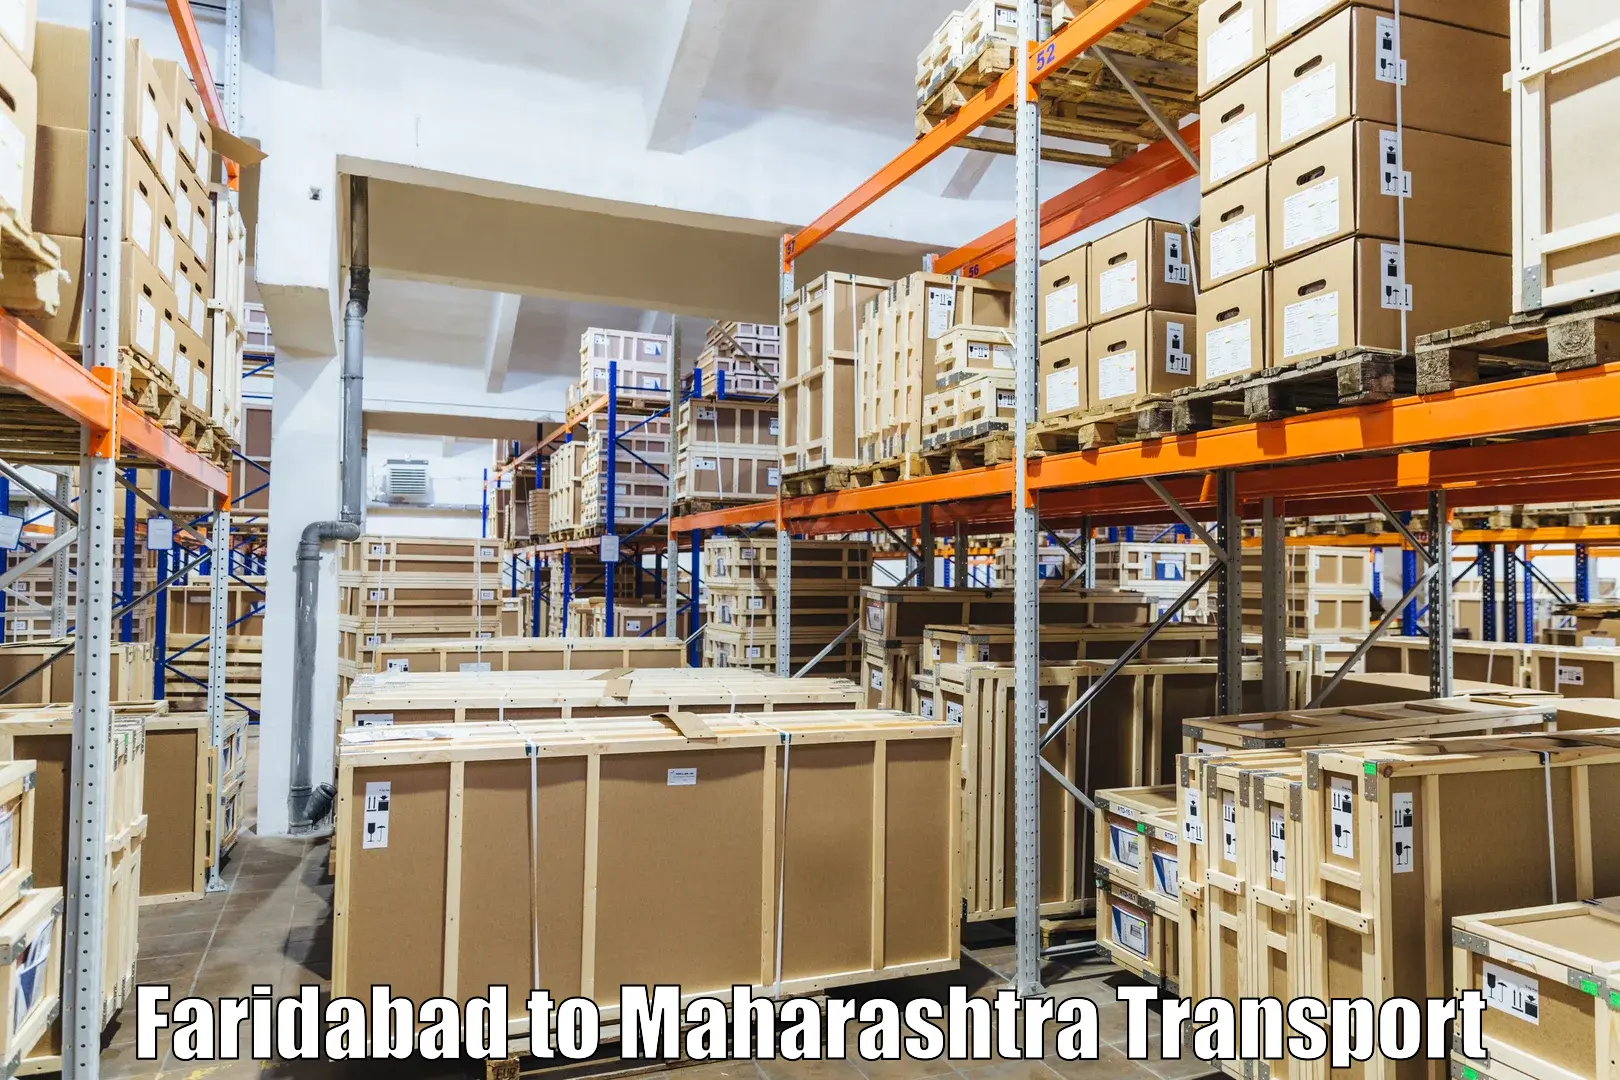 Cargo transport services in Faridabad to Aheri